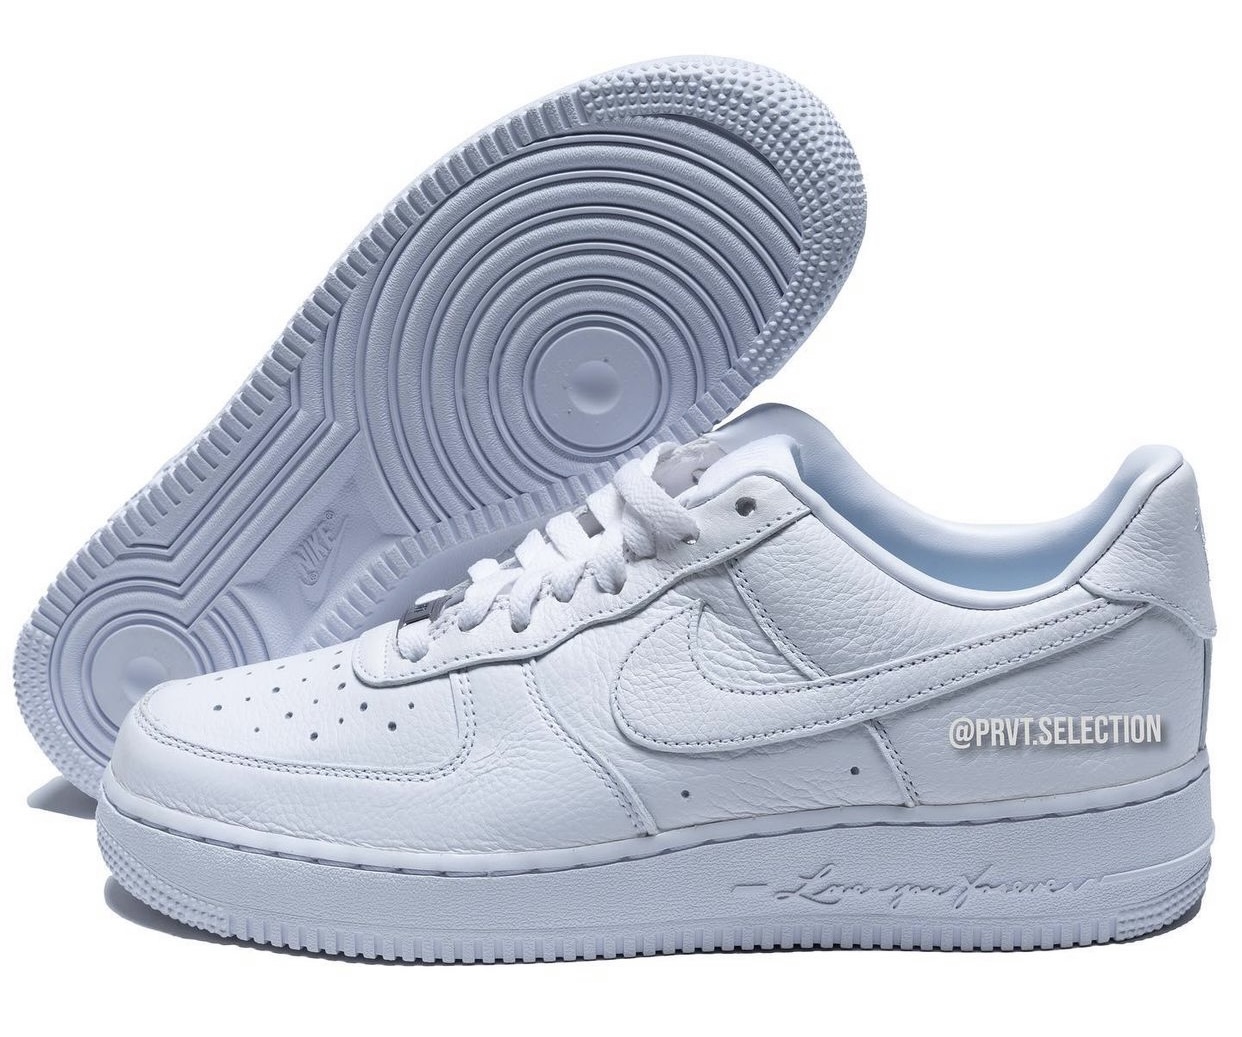 Drake NOCTA Nike Air Force 1 Certified Lover Boy Release Date